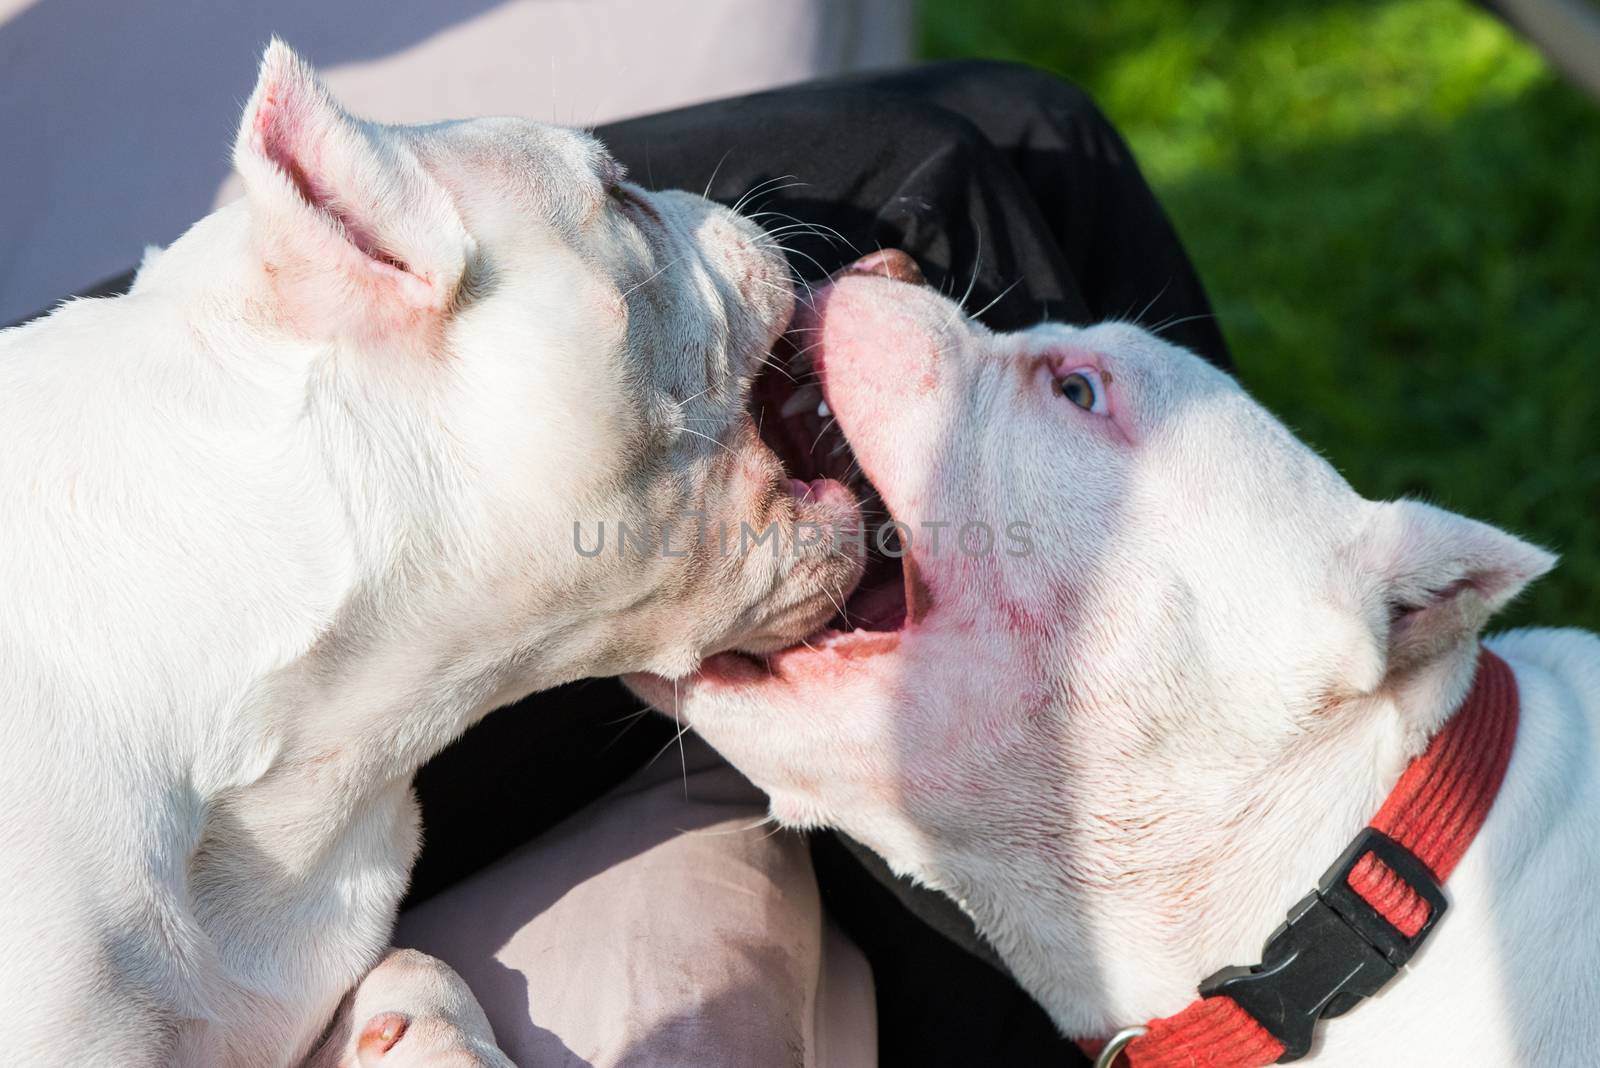 Two White American Bully puppies dogs are playing in move on nature on green grass. Medium sized dog with a compact bulky muscular body, blocky head and heavy bone structure.